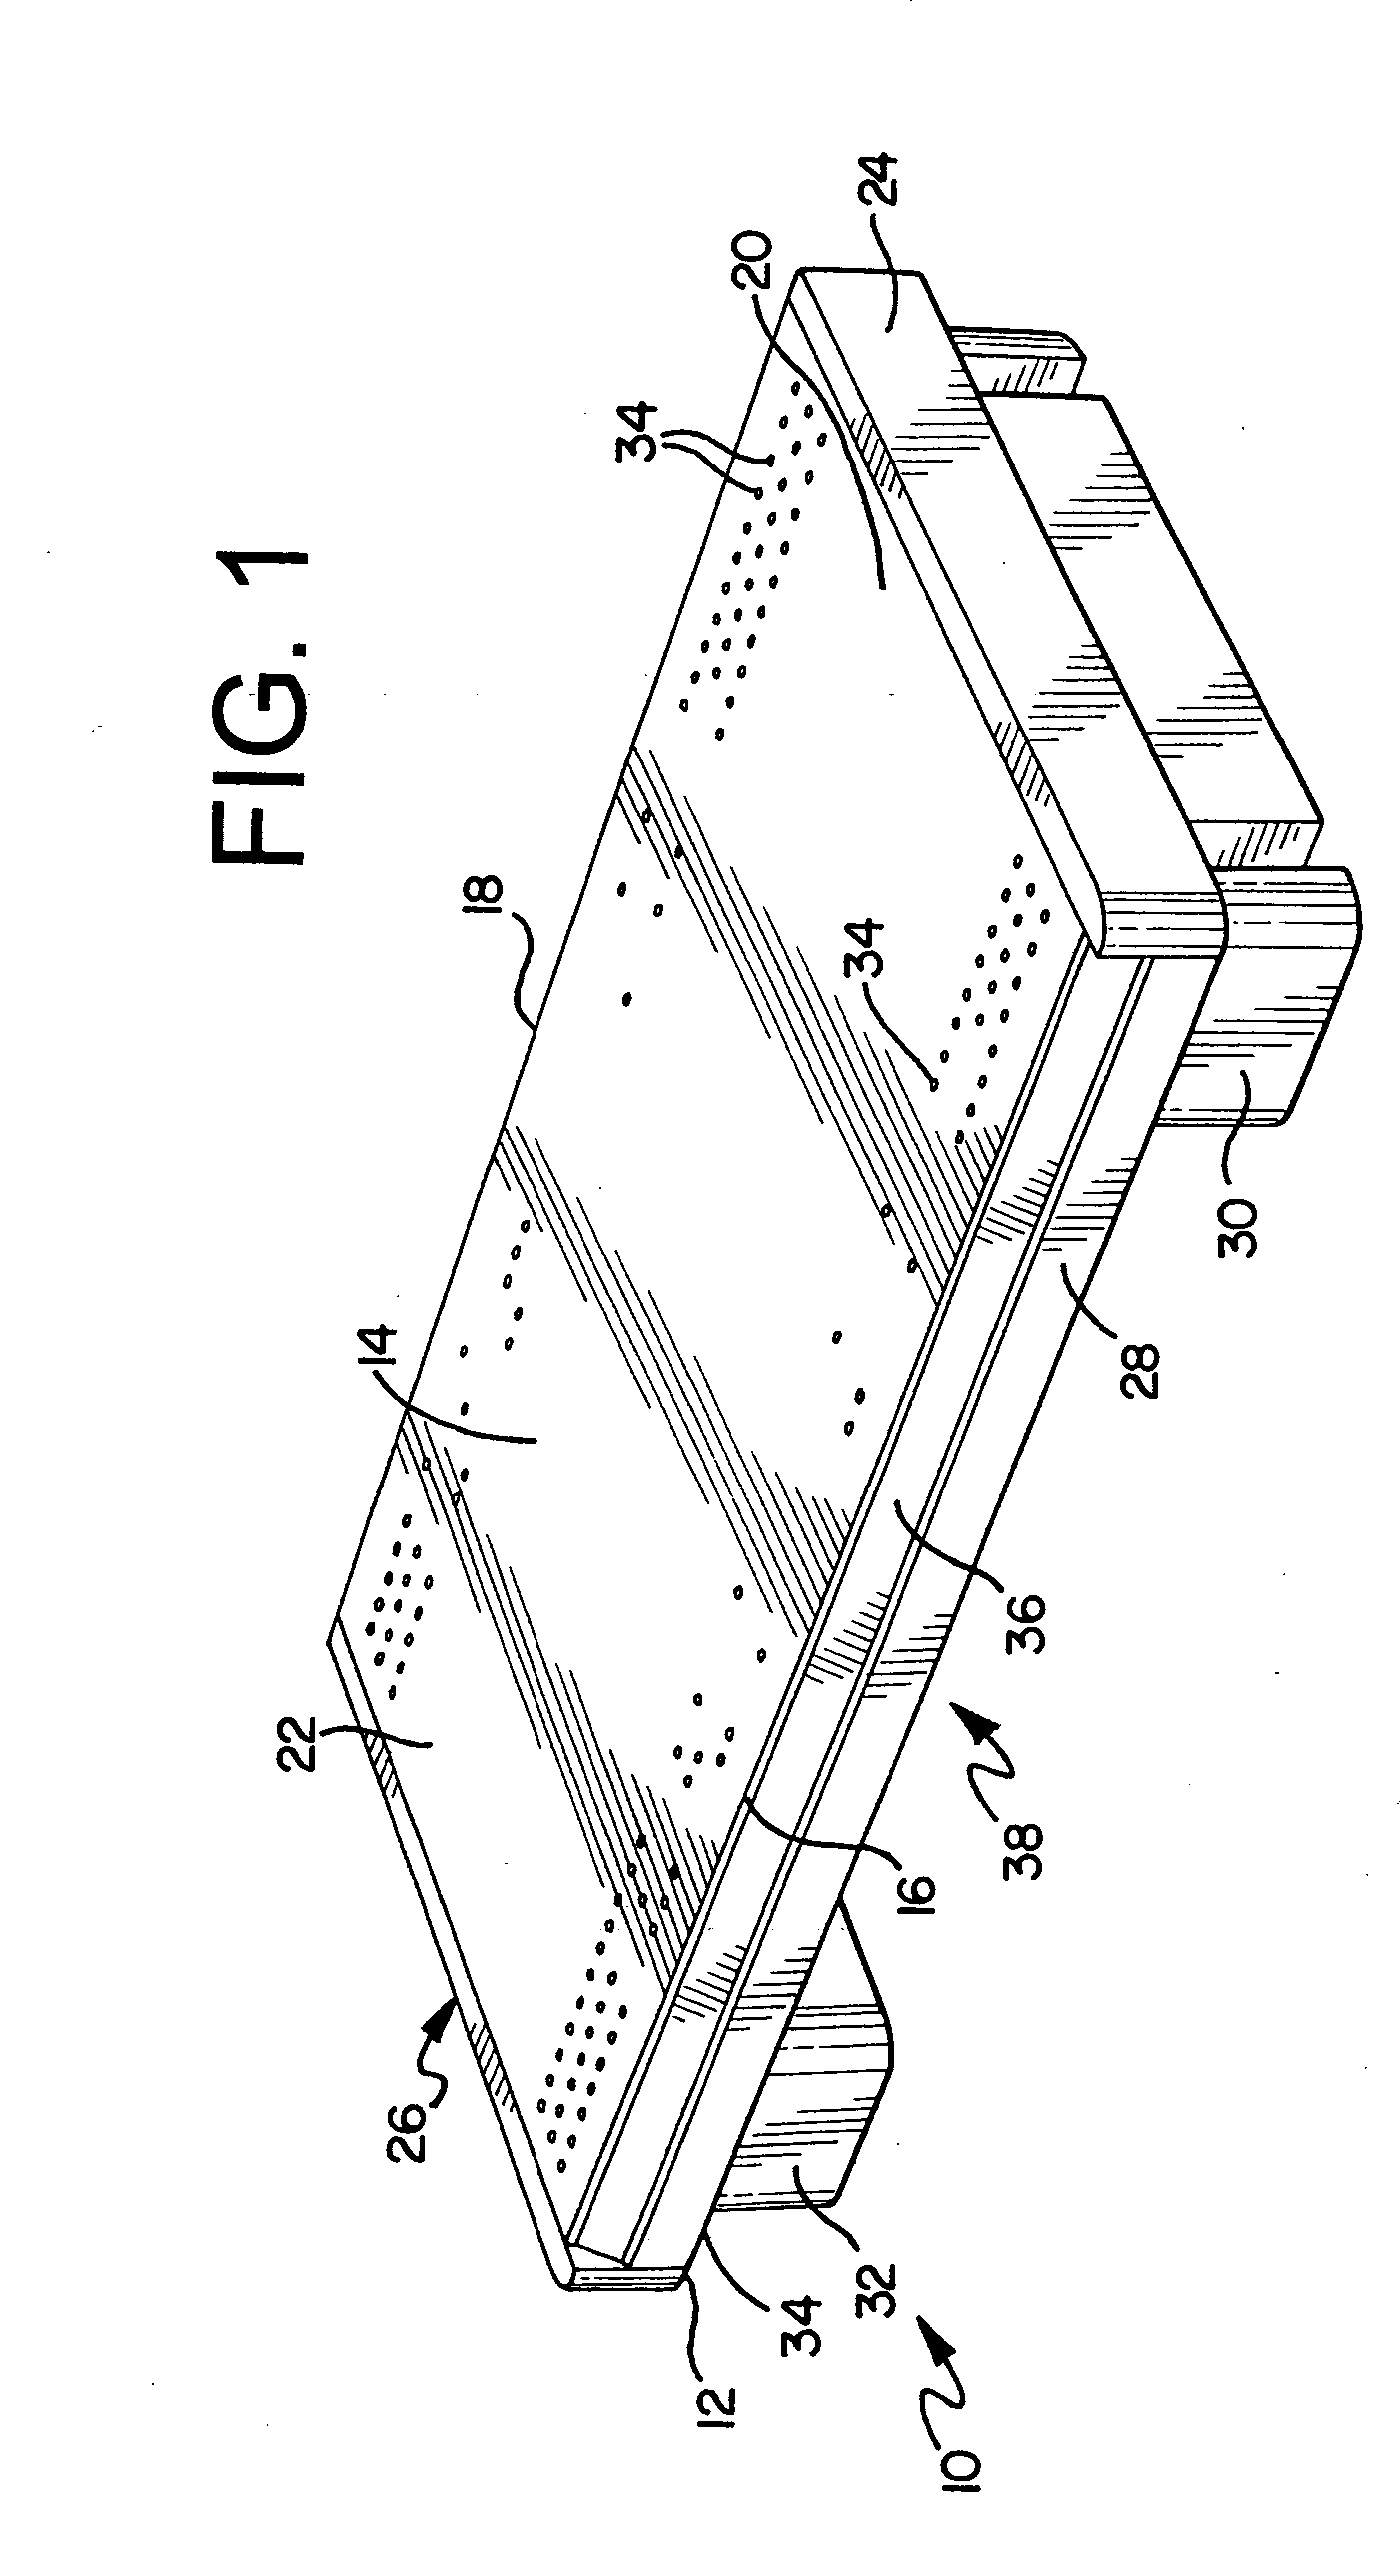 Coupling system for modular base deck and display system